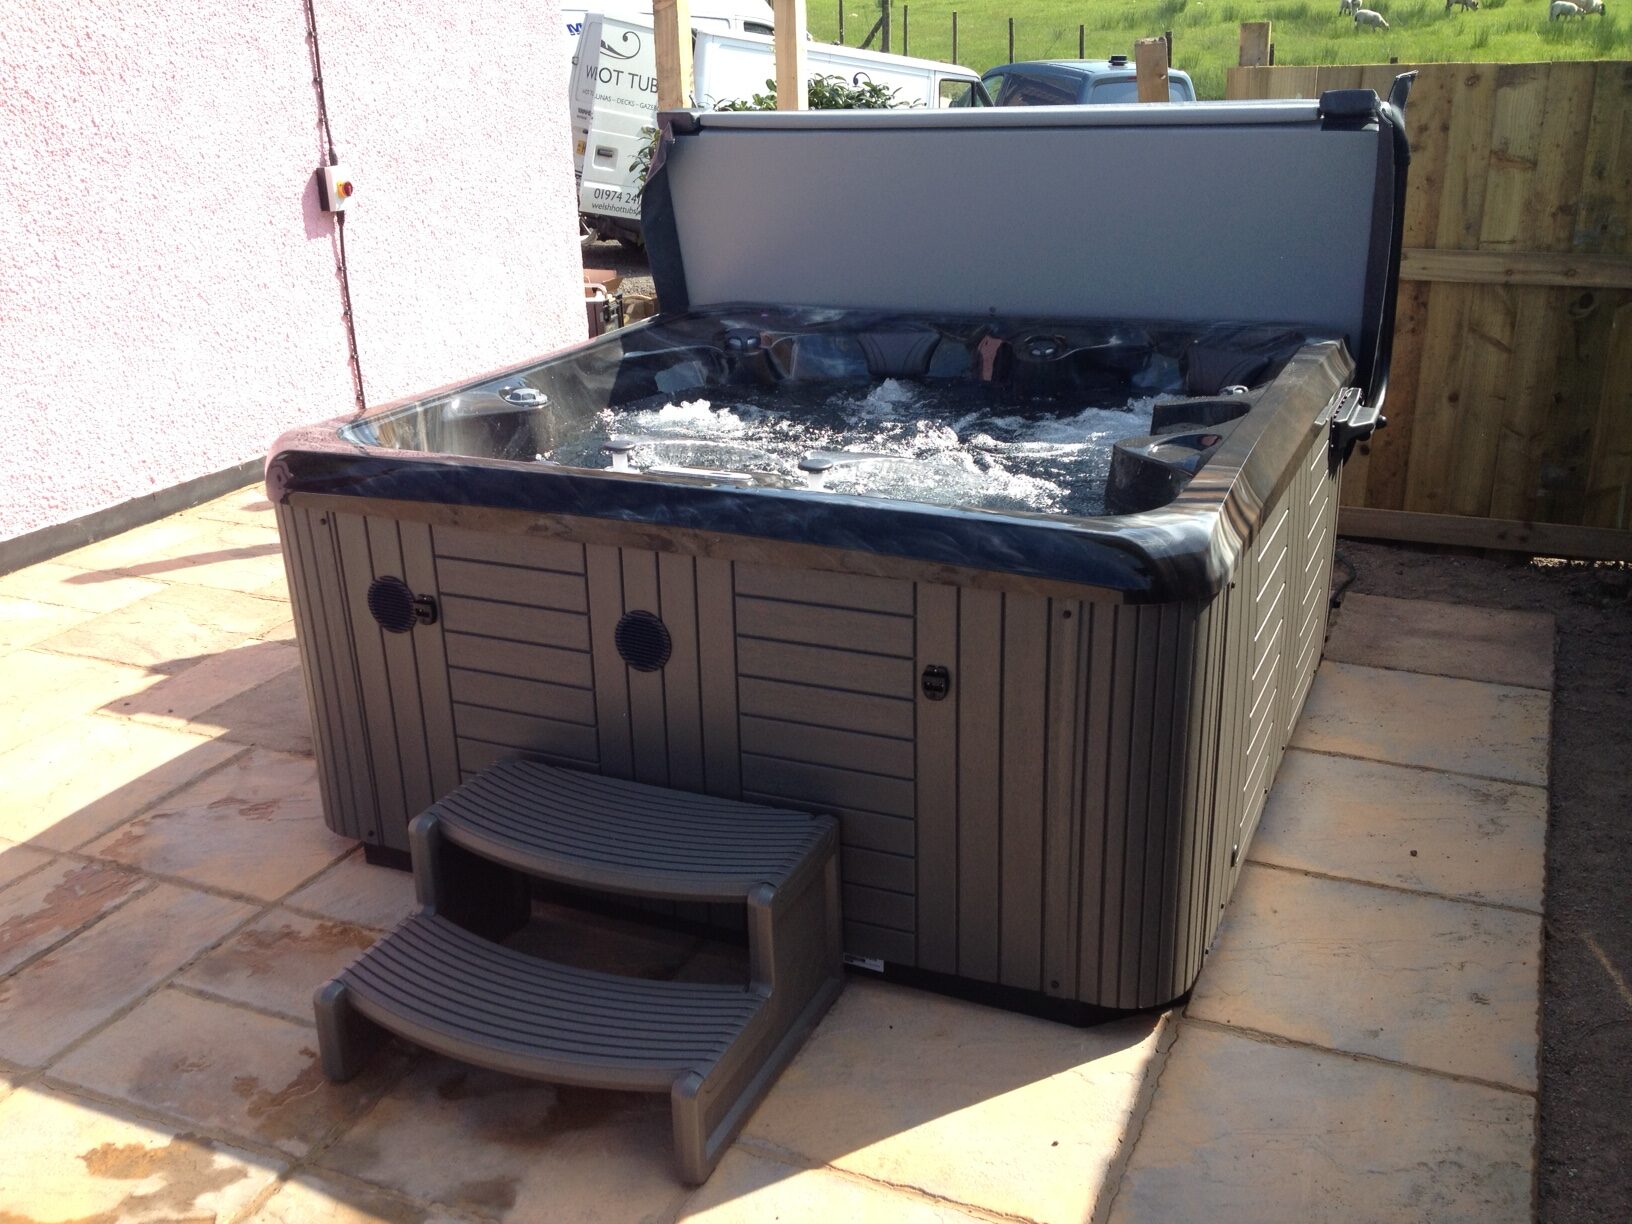 Marquis Spas Celebrity Broadway Hot Tub on a patio with jets on